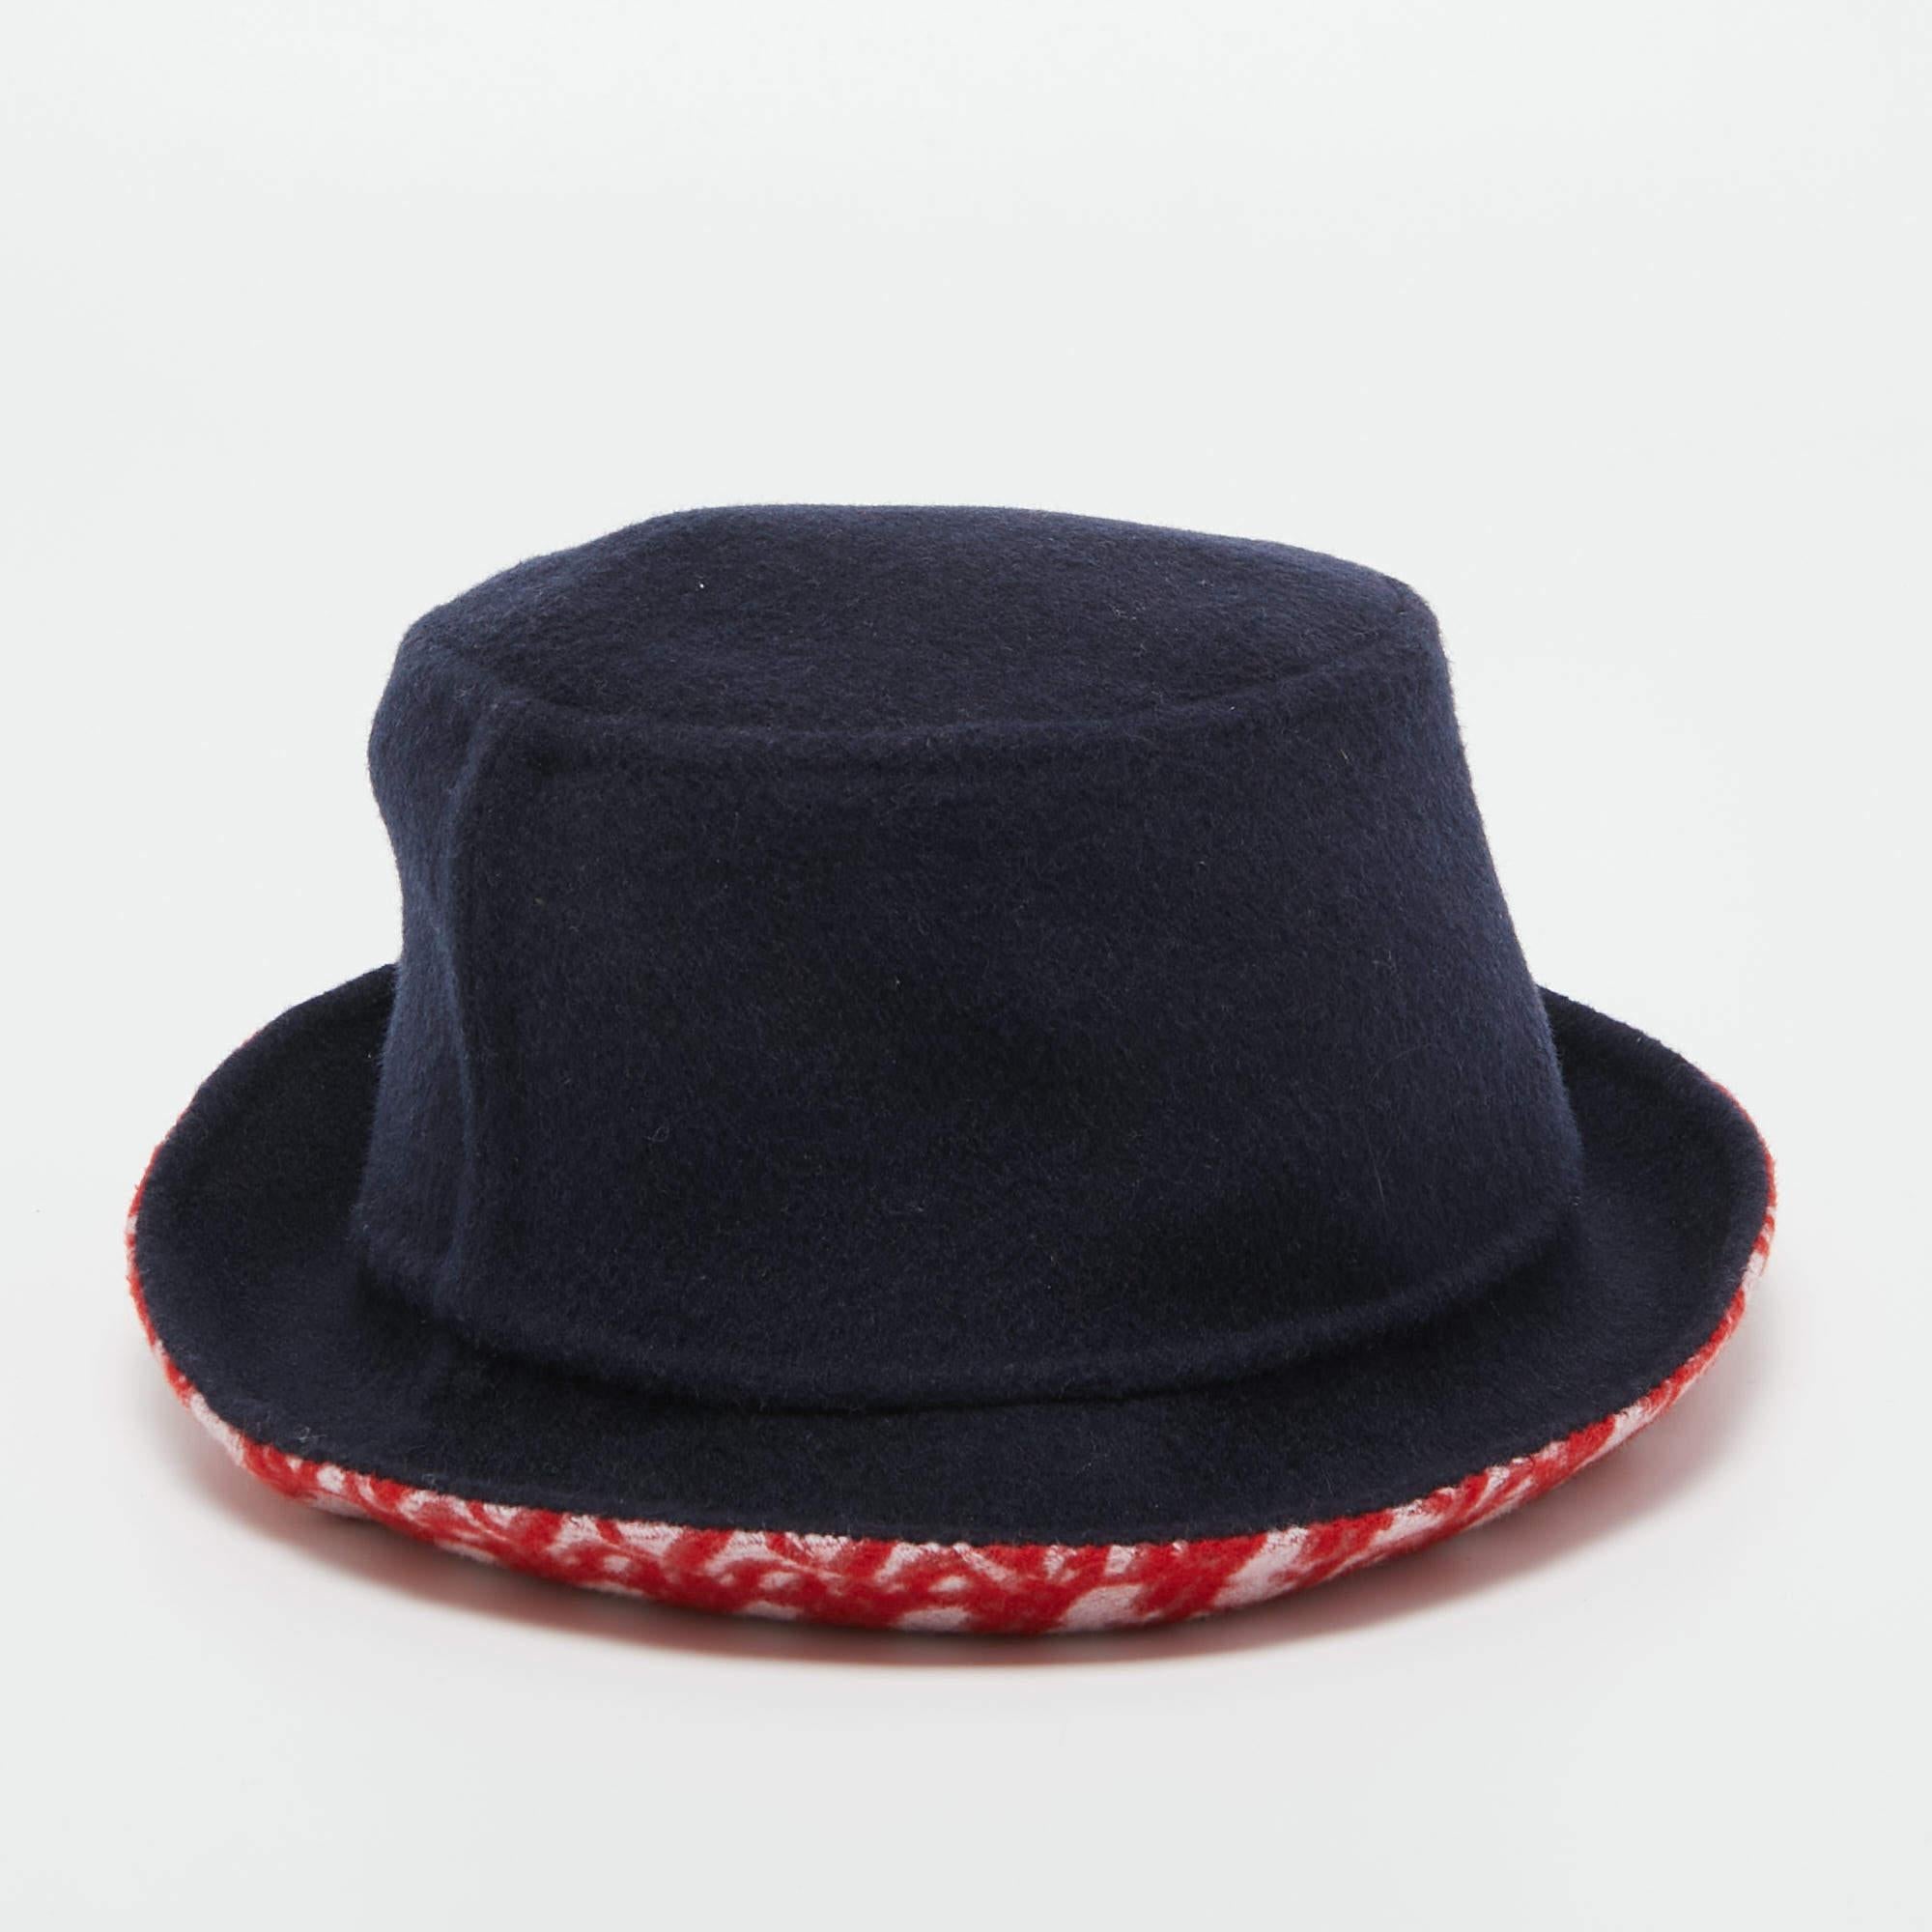 Women's Dior Navy Blue/Red Oblique Wool Reversible Dior Chic Hat Size 57 For Sale